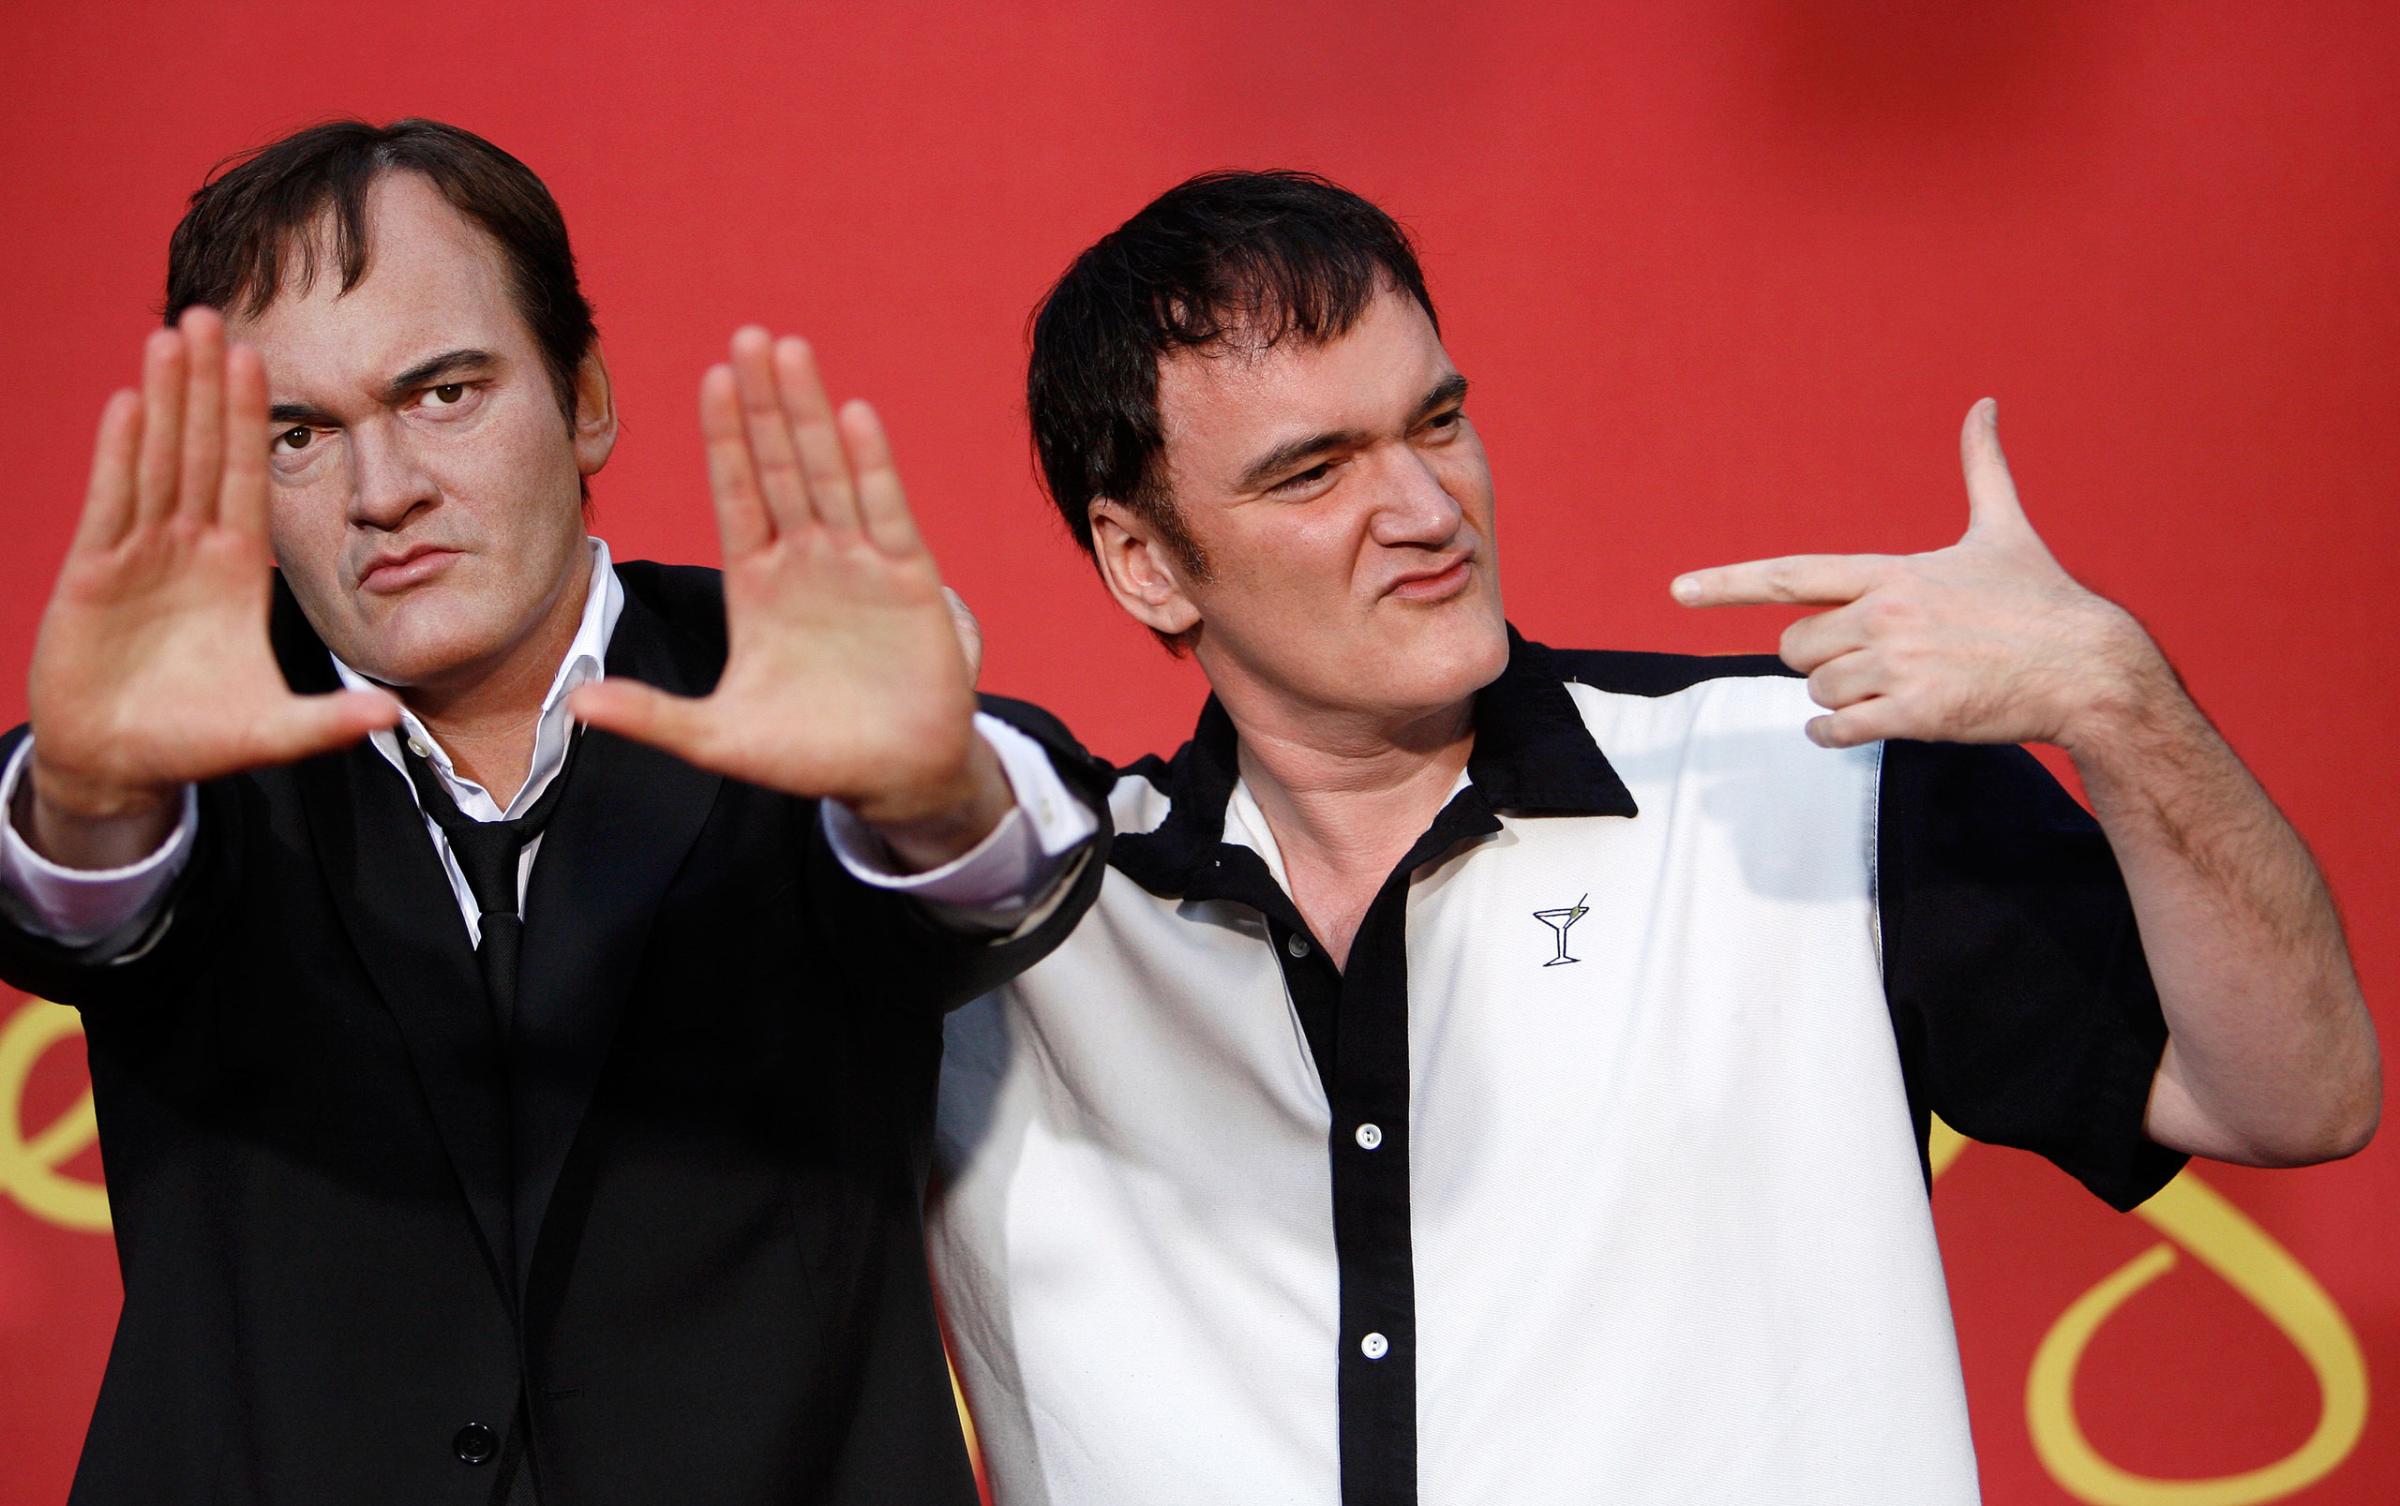 Tarantino poses next to his wax figure after it was unveiled at Madame Tussauds in Hollywood